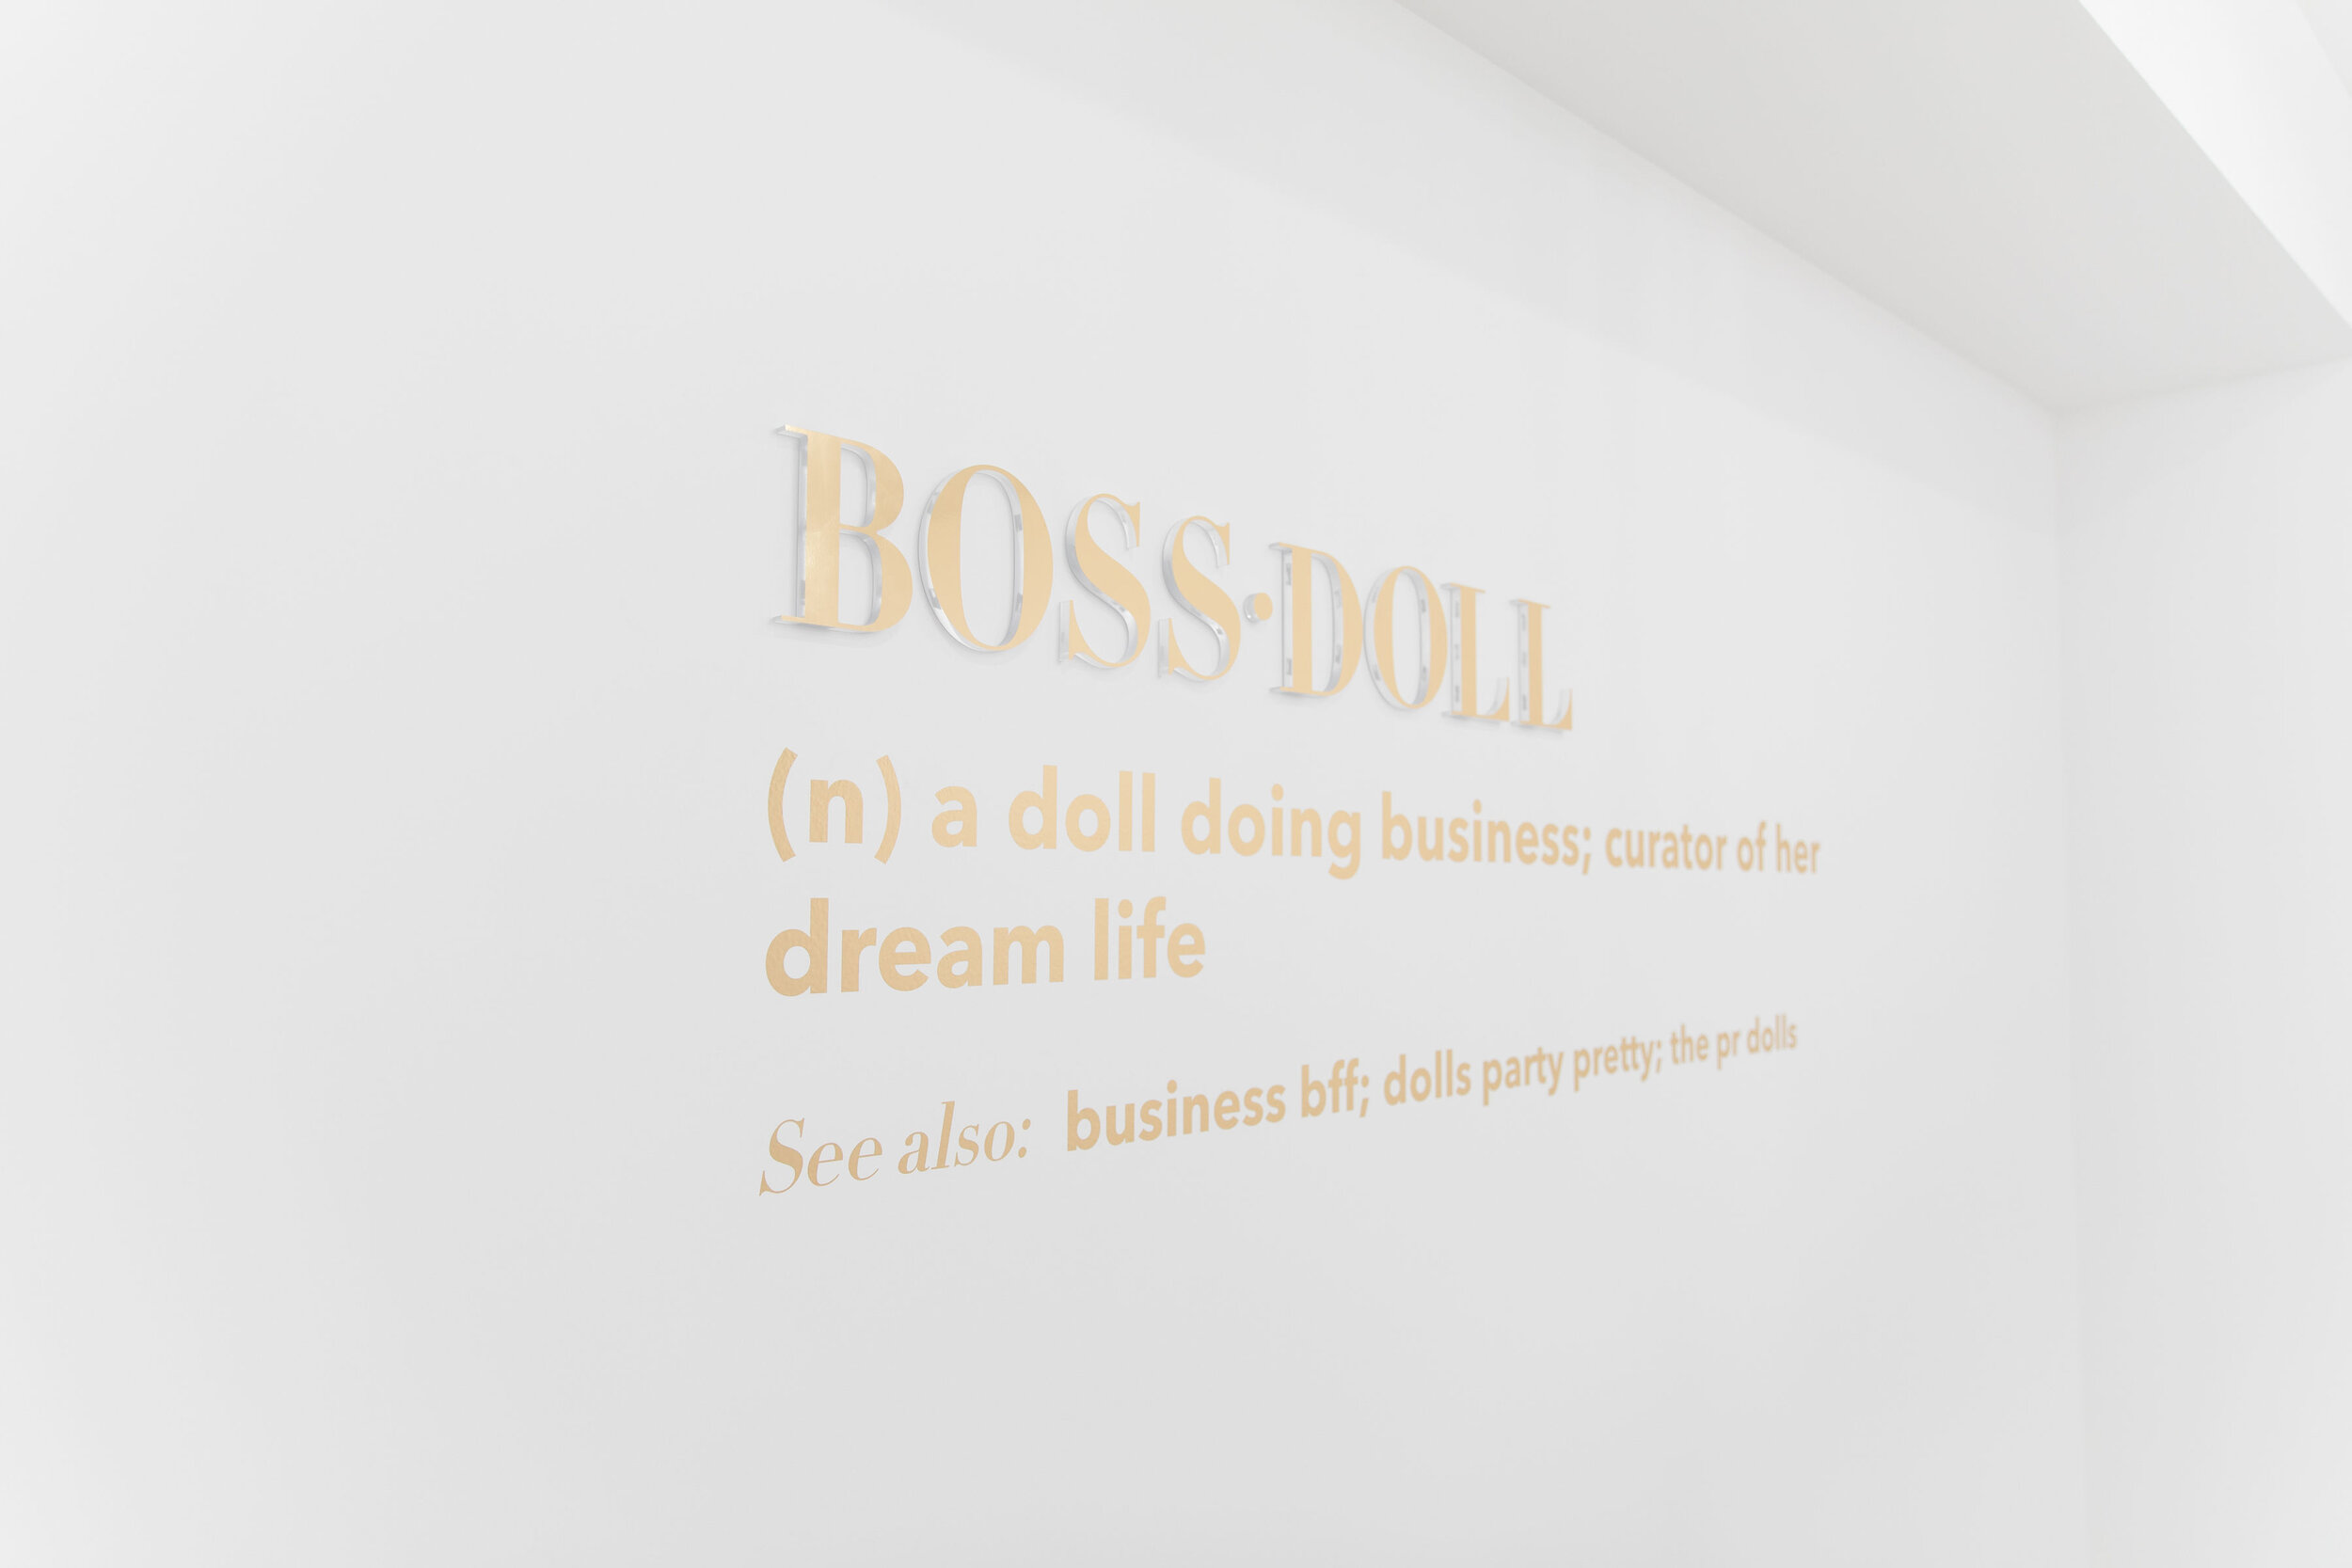 POSH-PR-The-Caroline-Doll-Barbie-Office-Pink-Style-Boss-Goals-At-Home-Workspace-Luxury-Fashion-Infused-Office-The-Doll-HQ-Chic-Conference-Room-Boss-Doll-1.jpg